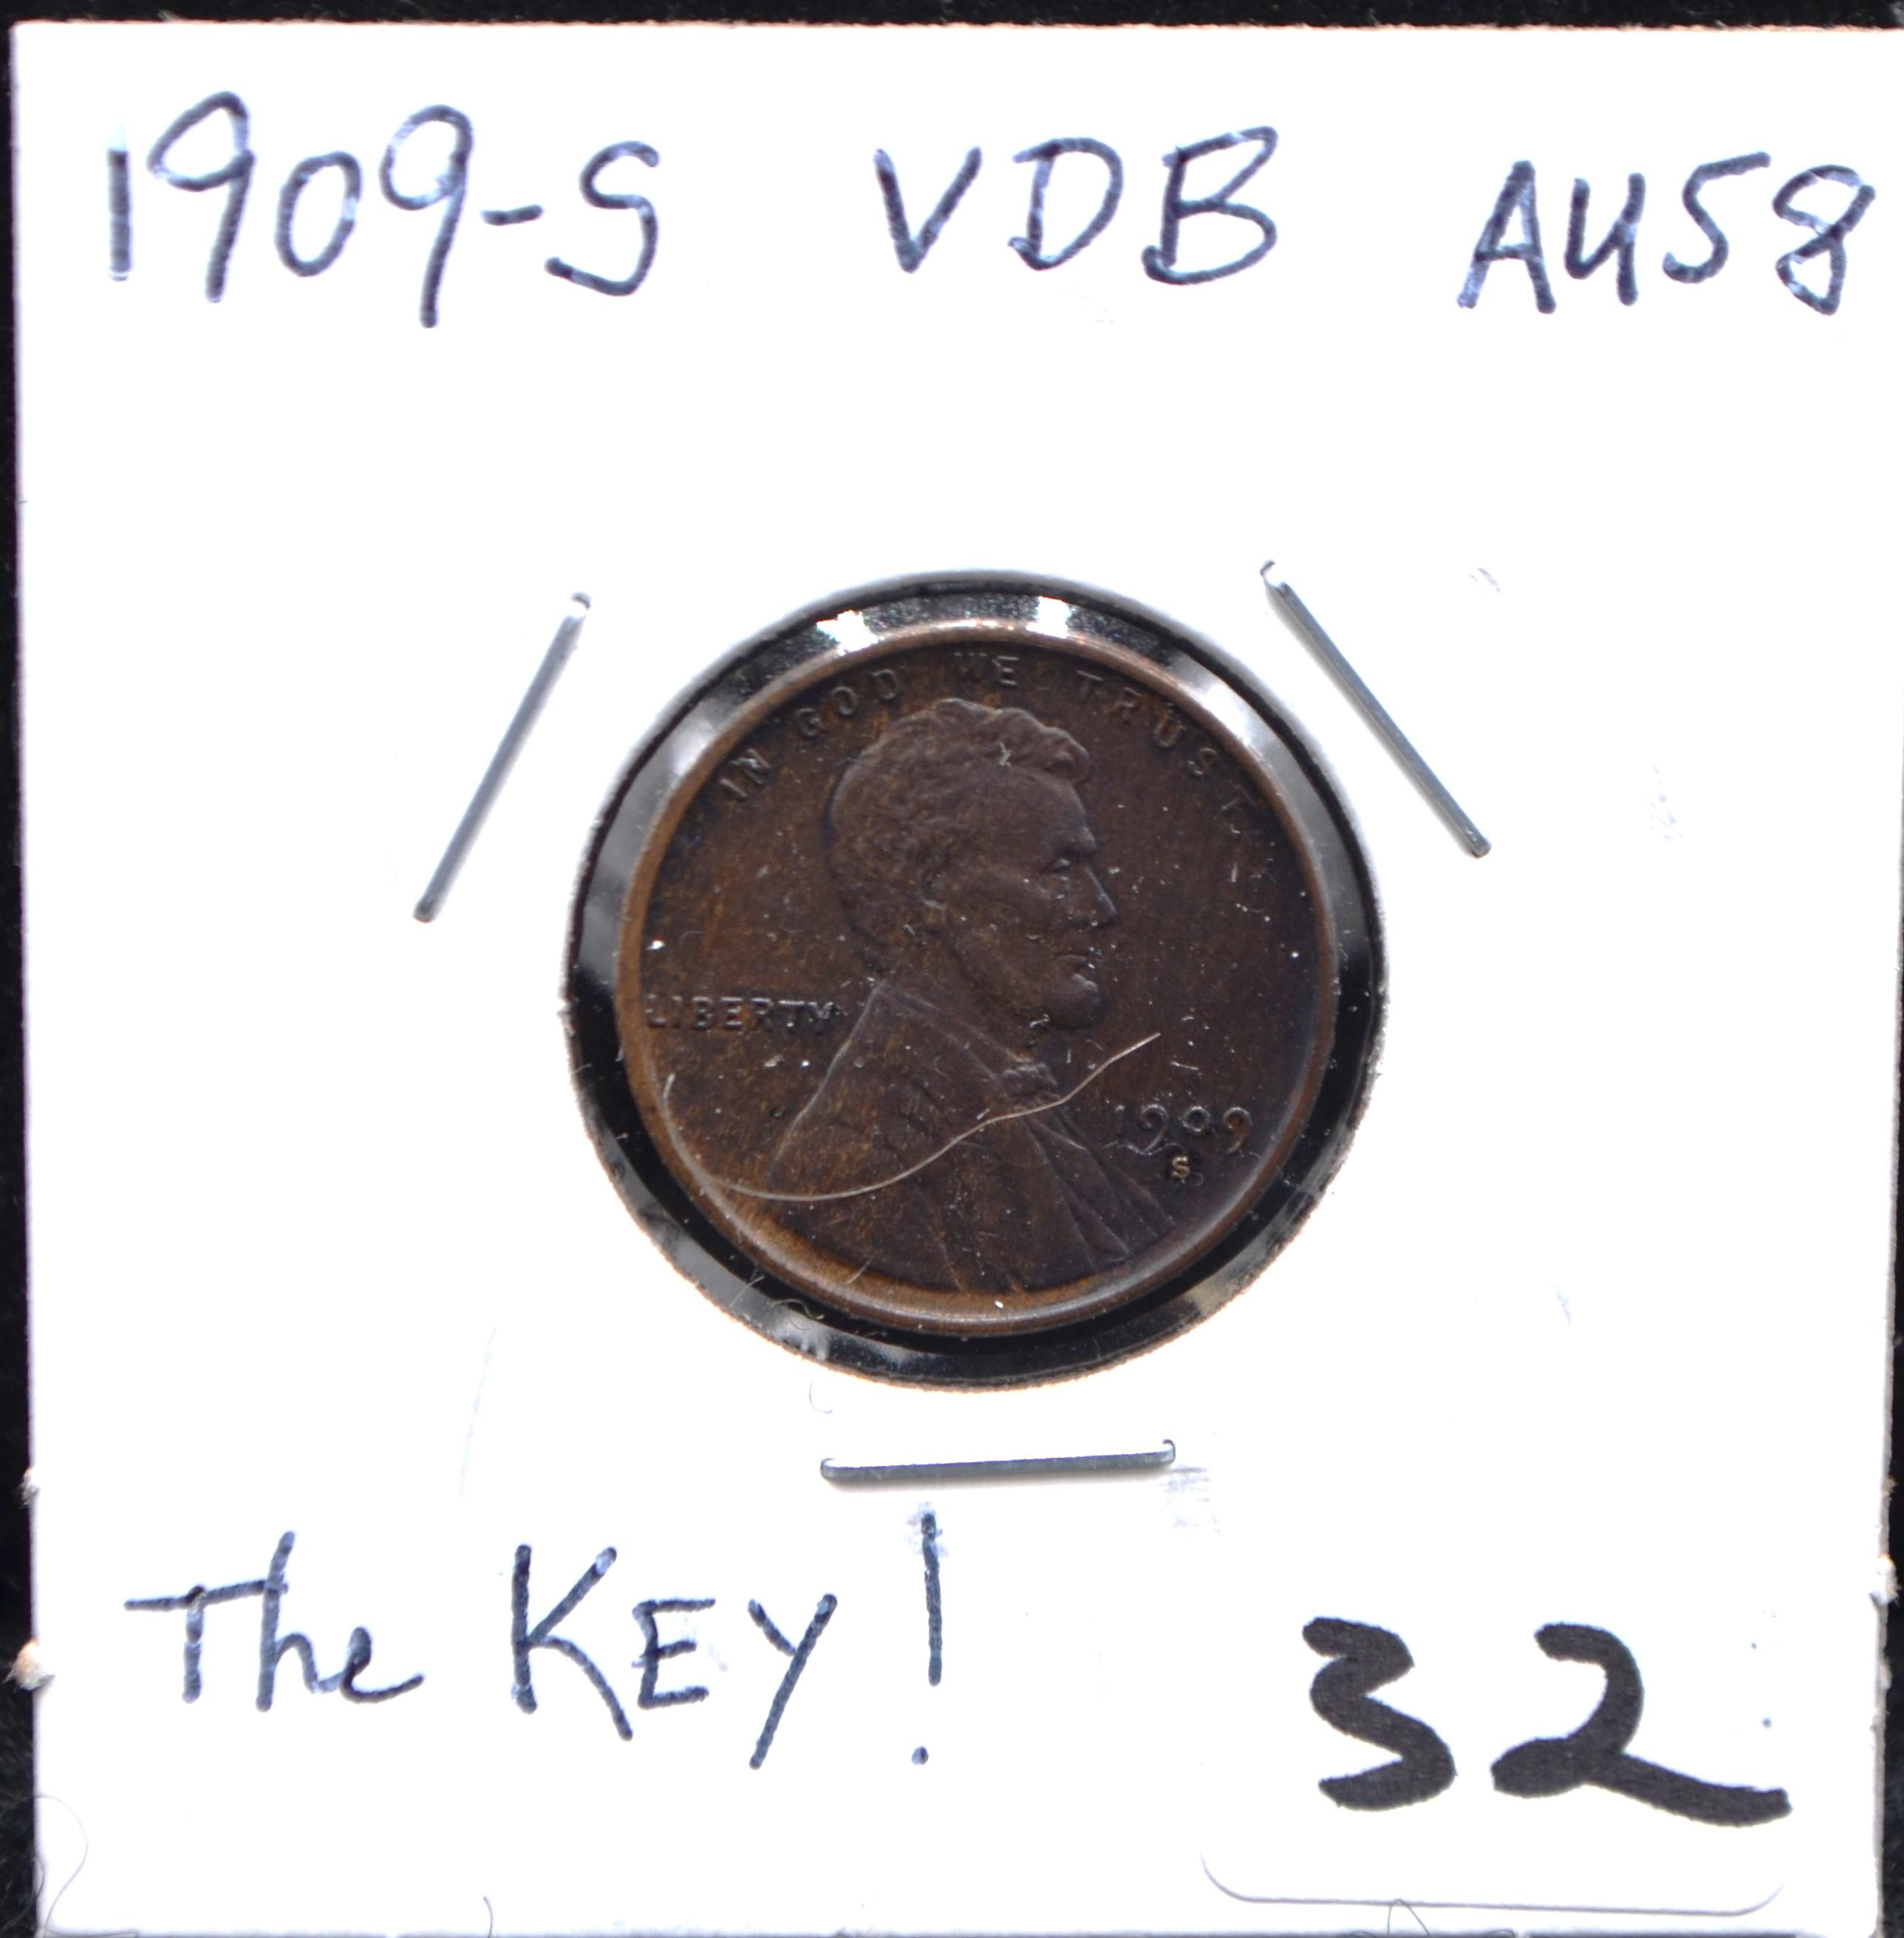 KEY DATE 1909-S VDB LINCOLN WHEAT PENNY